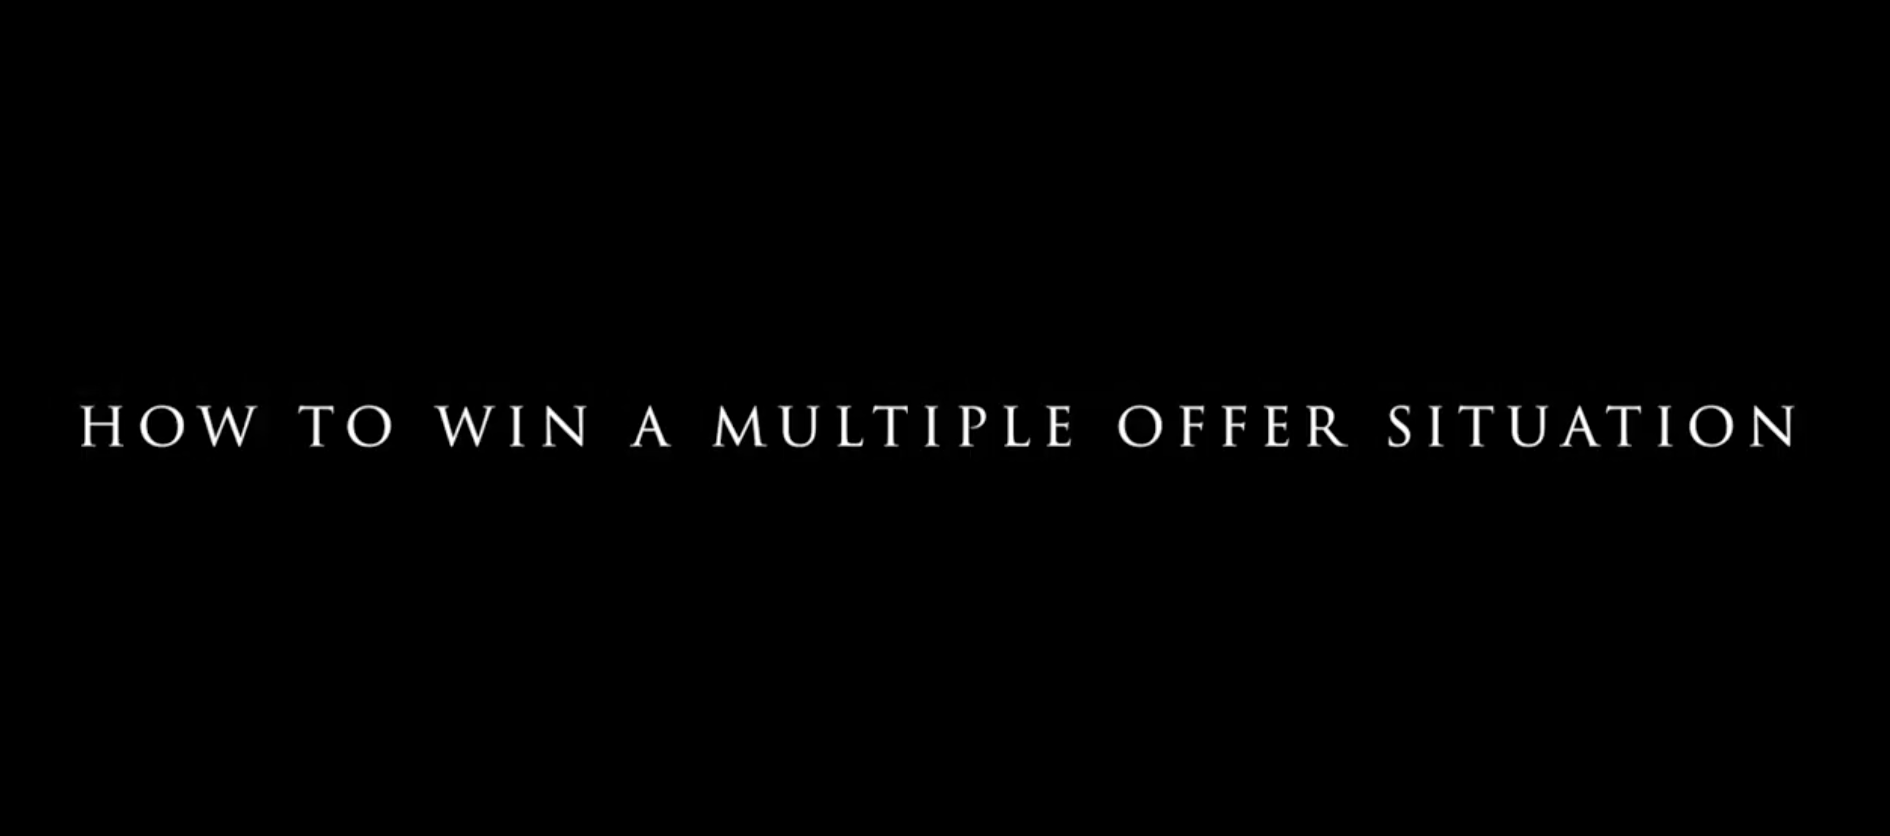 How to Win a Multiple Offer Situation | The Sarkis Team | The Sarkis Team  Douglas Elliman